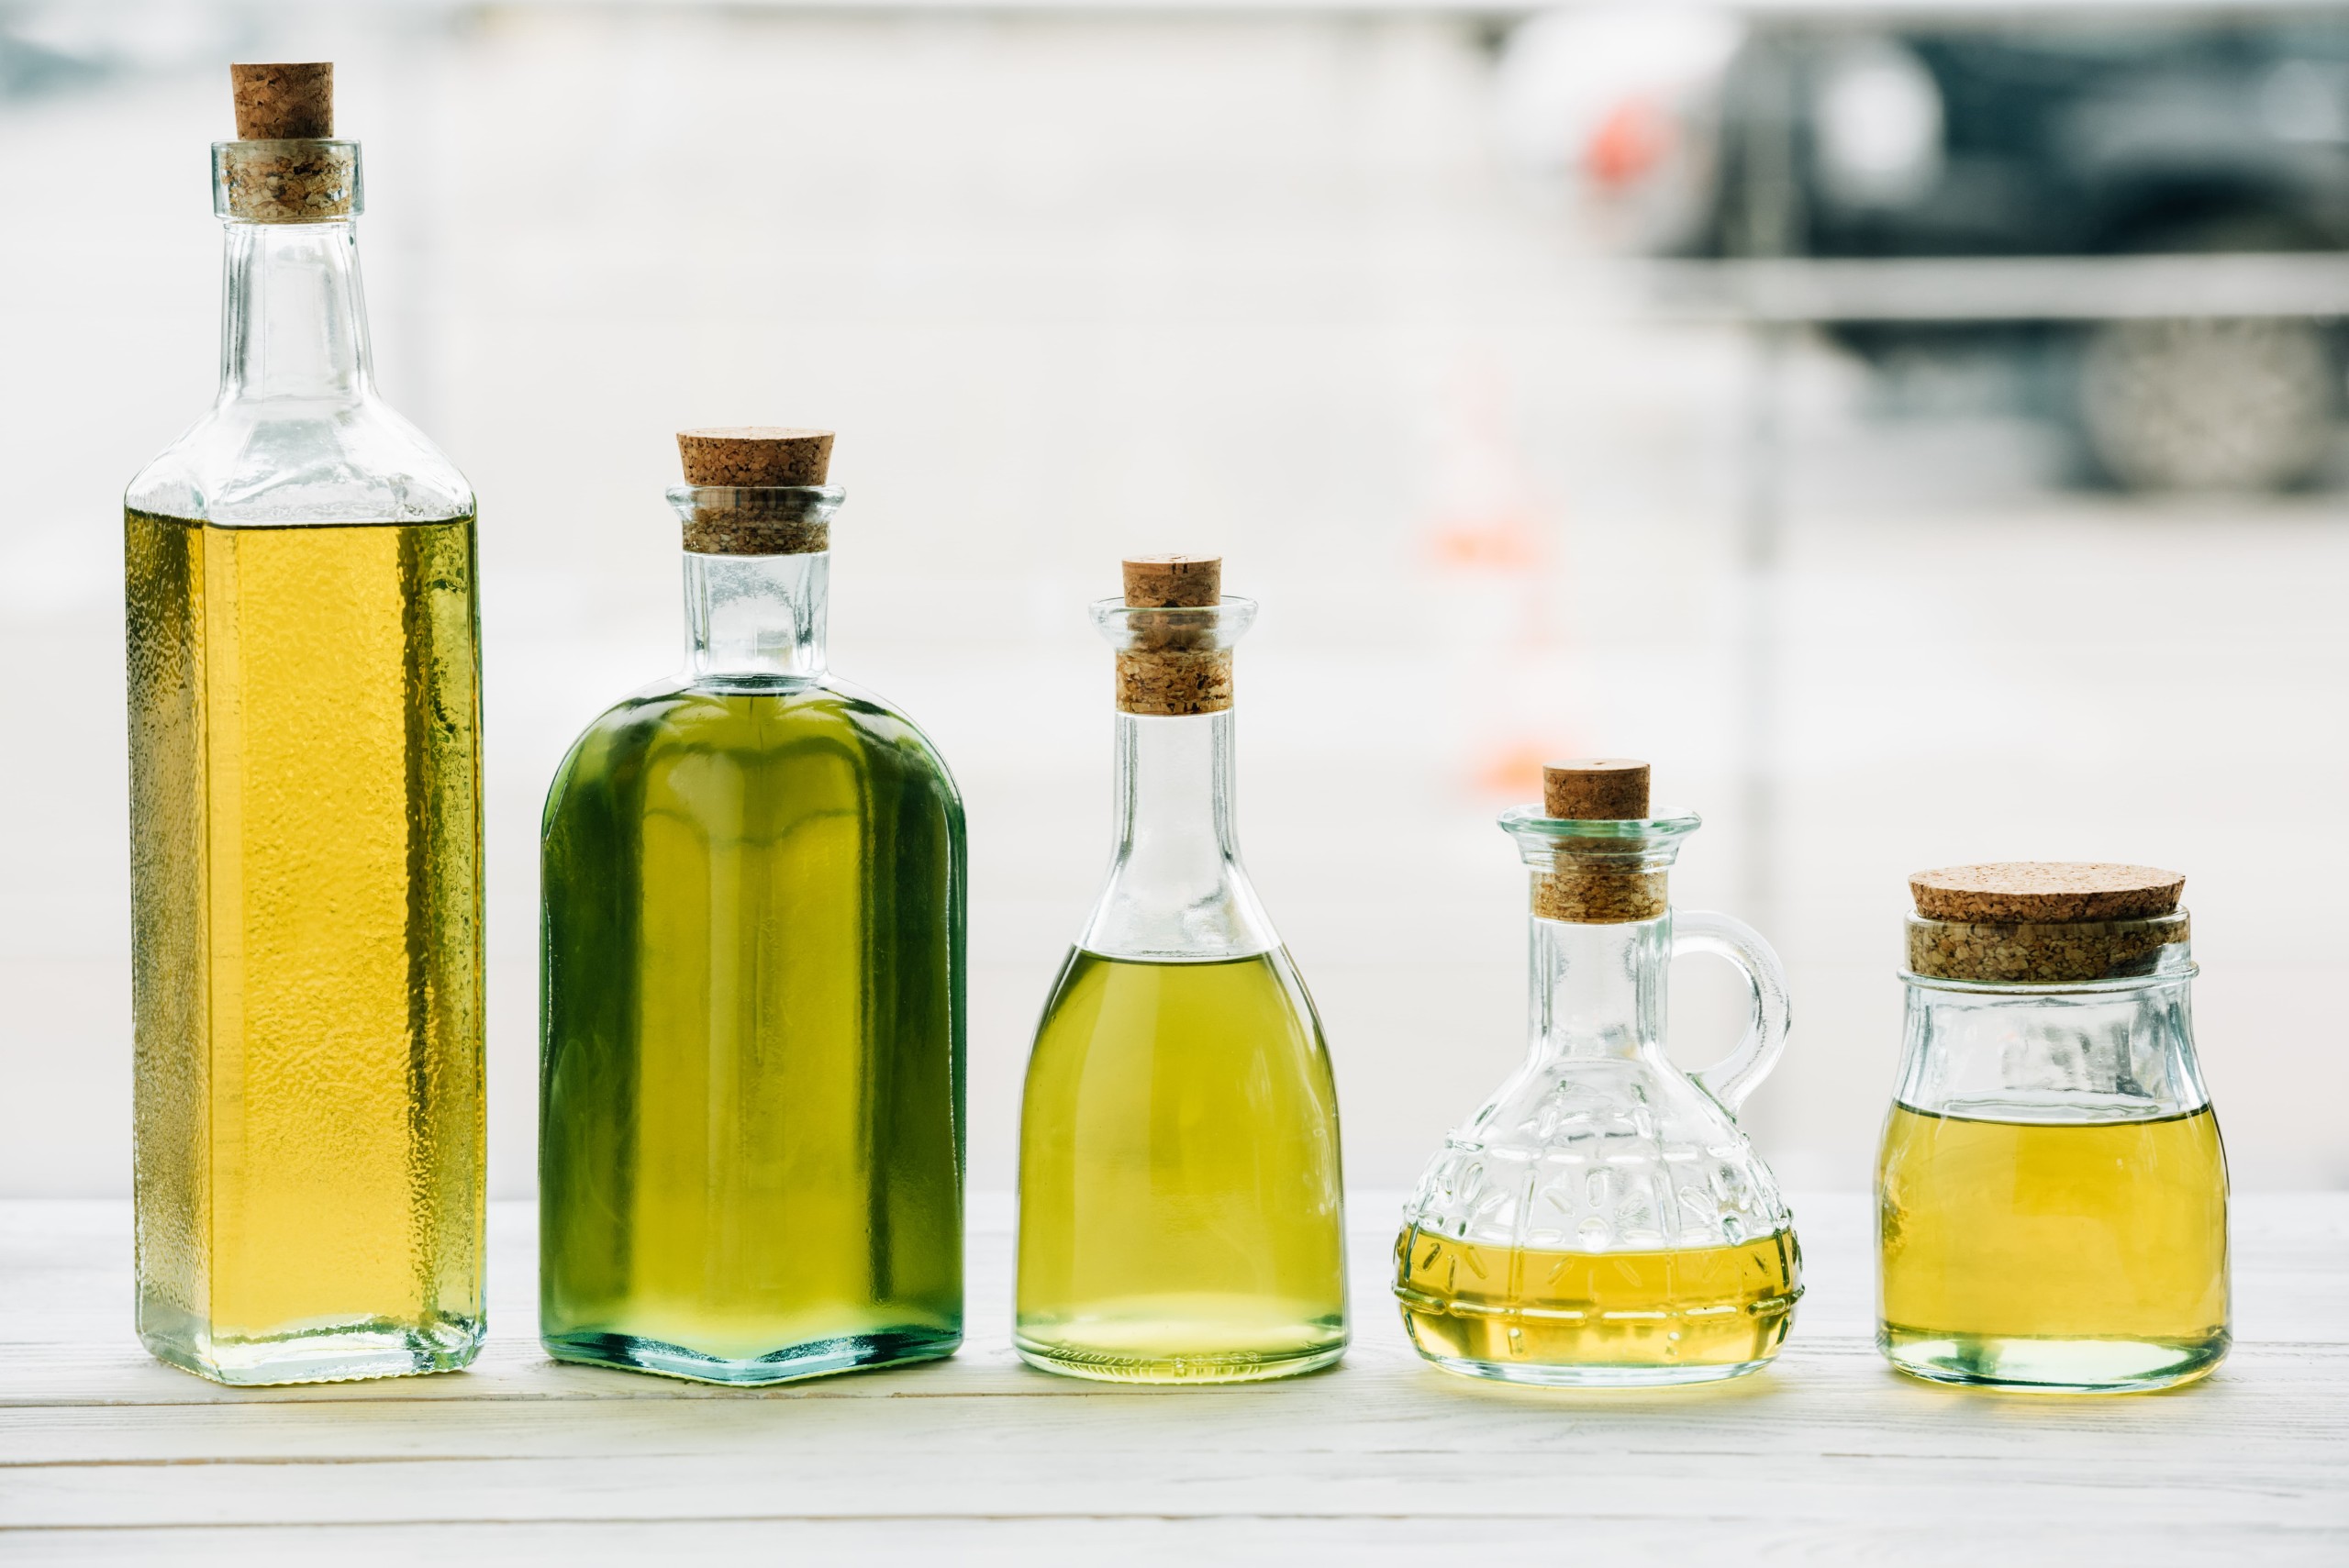 How Should Olive Oil Be Stored?